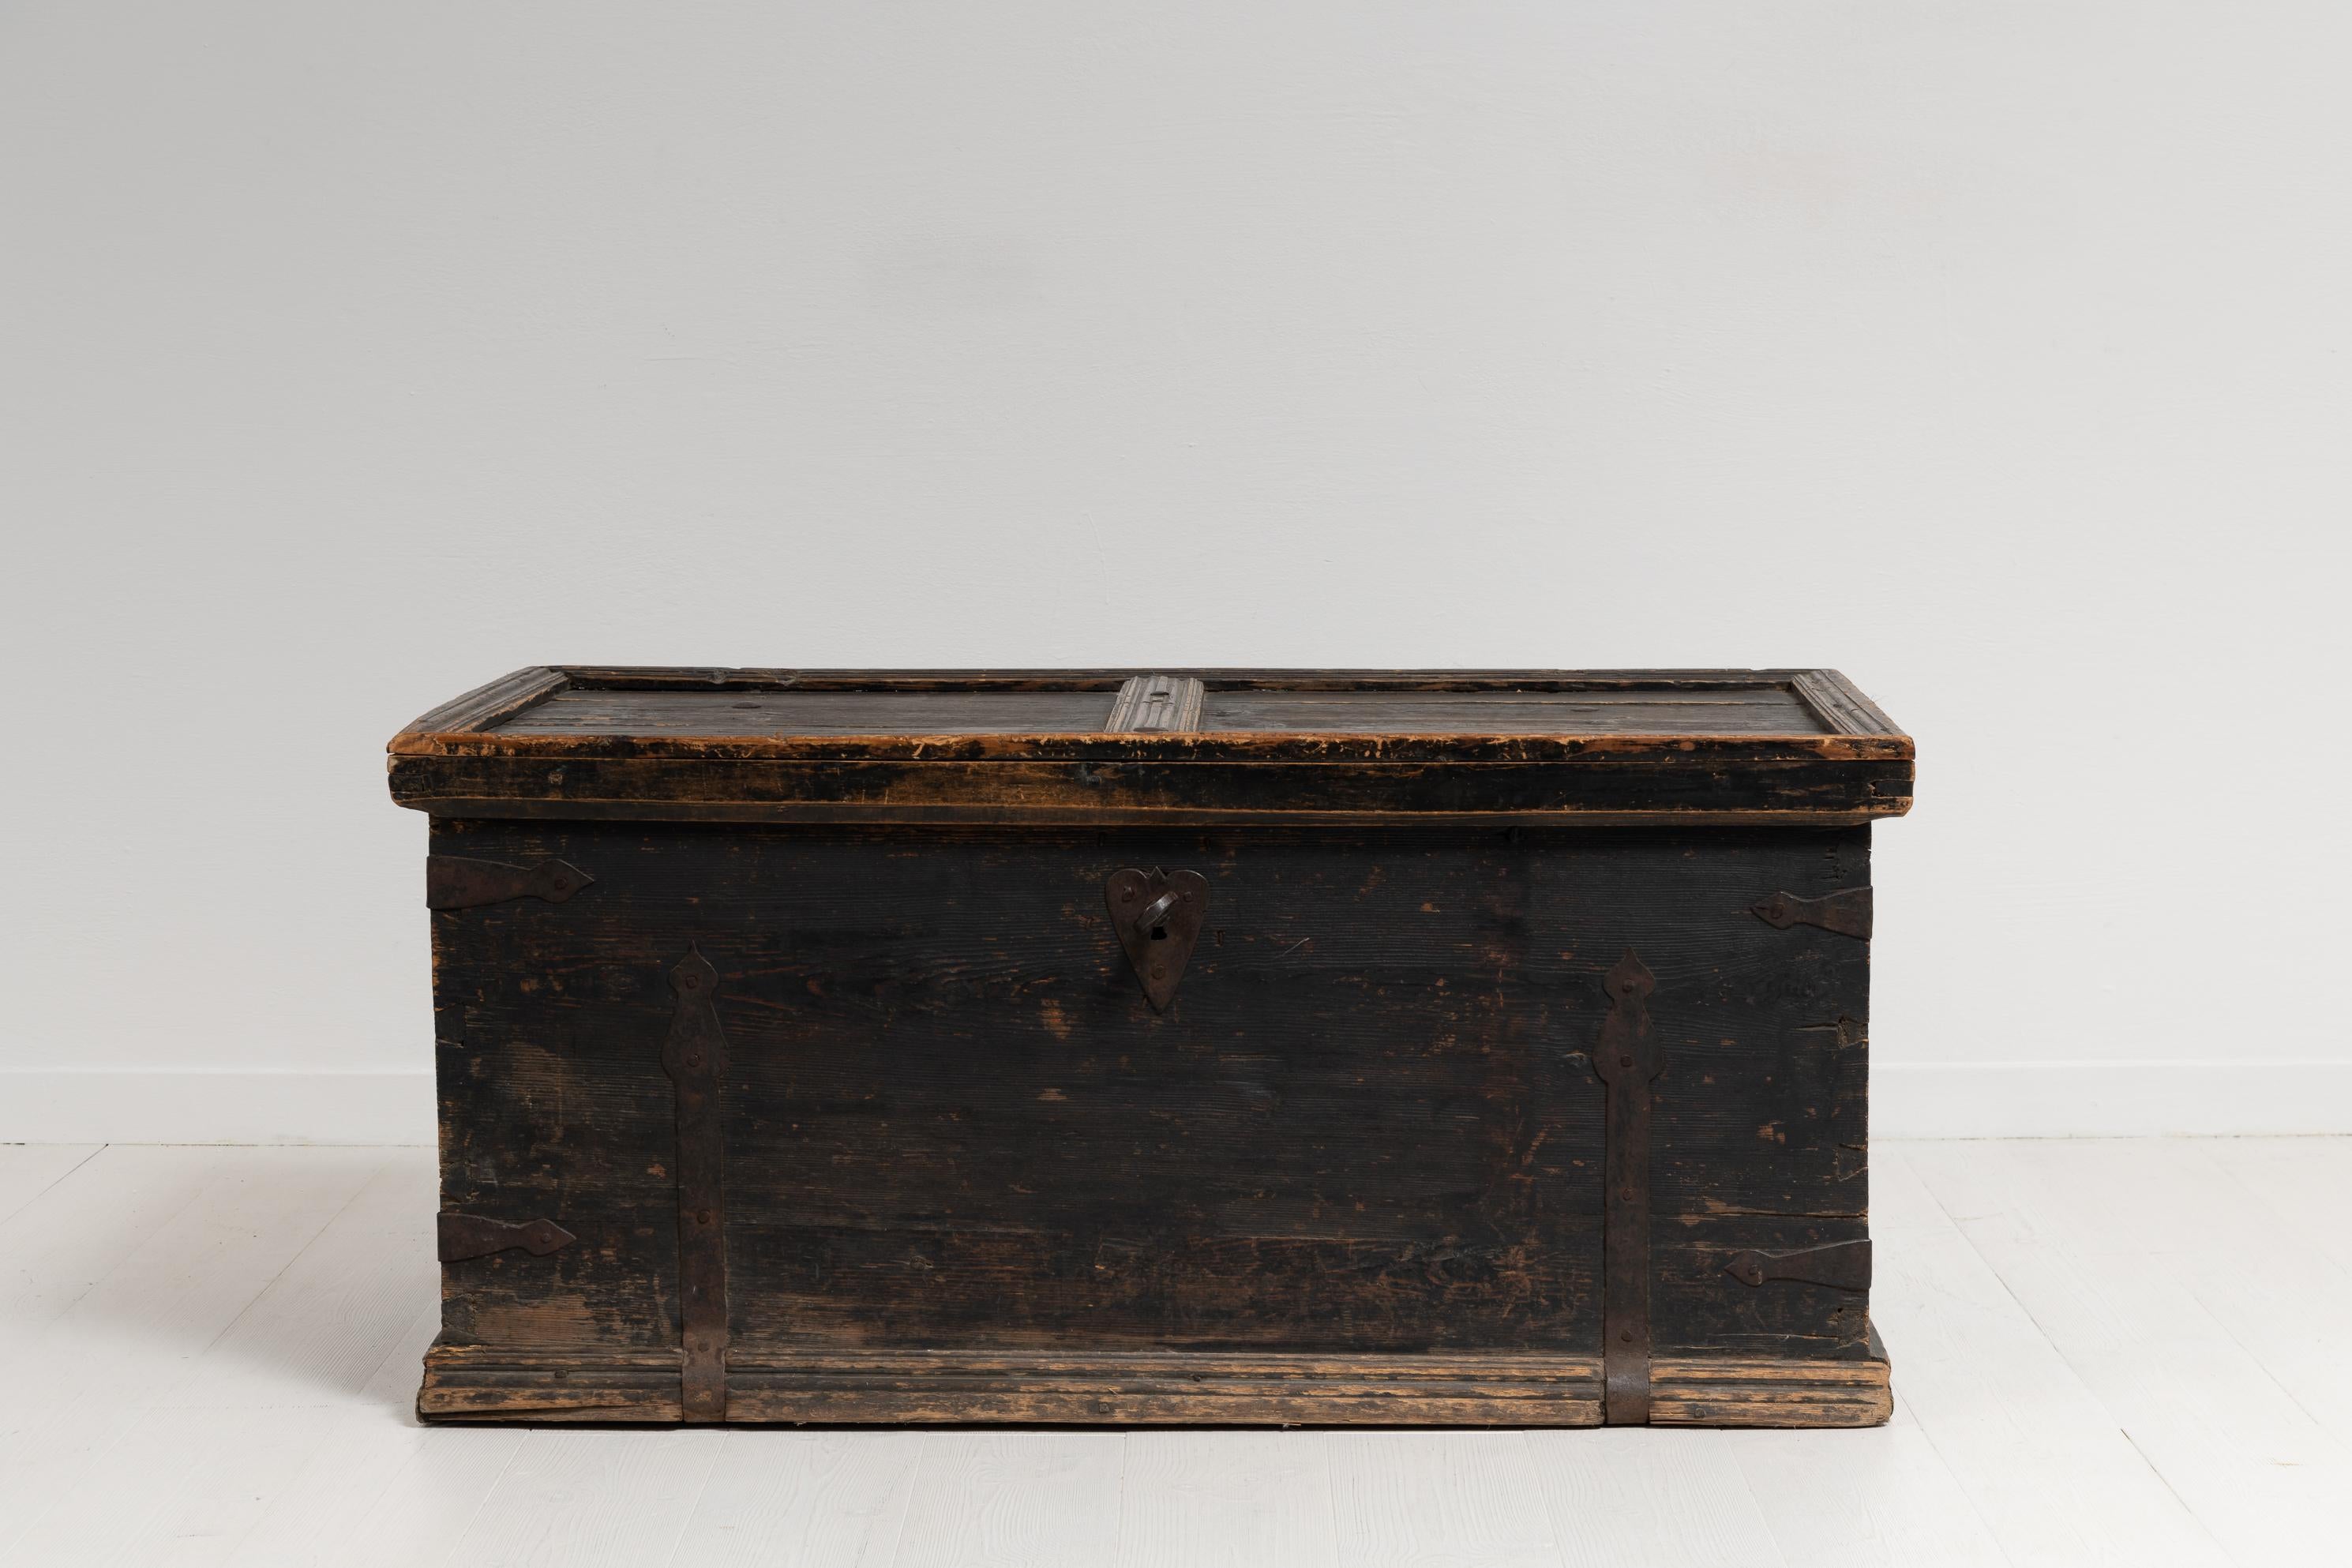 Soldier’s chest from Järvsö in Hälsingland, Sweden. Made around 1820 to 1840 the solider would keep their private effects in chests such as this. Original black paint and working original lock and key. Great authentic patina. It is unusual see